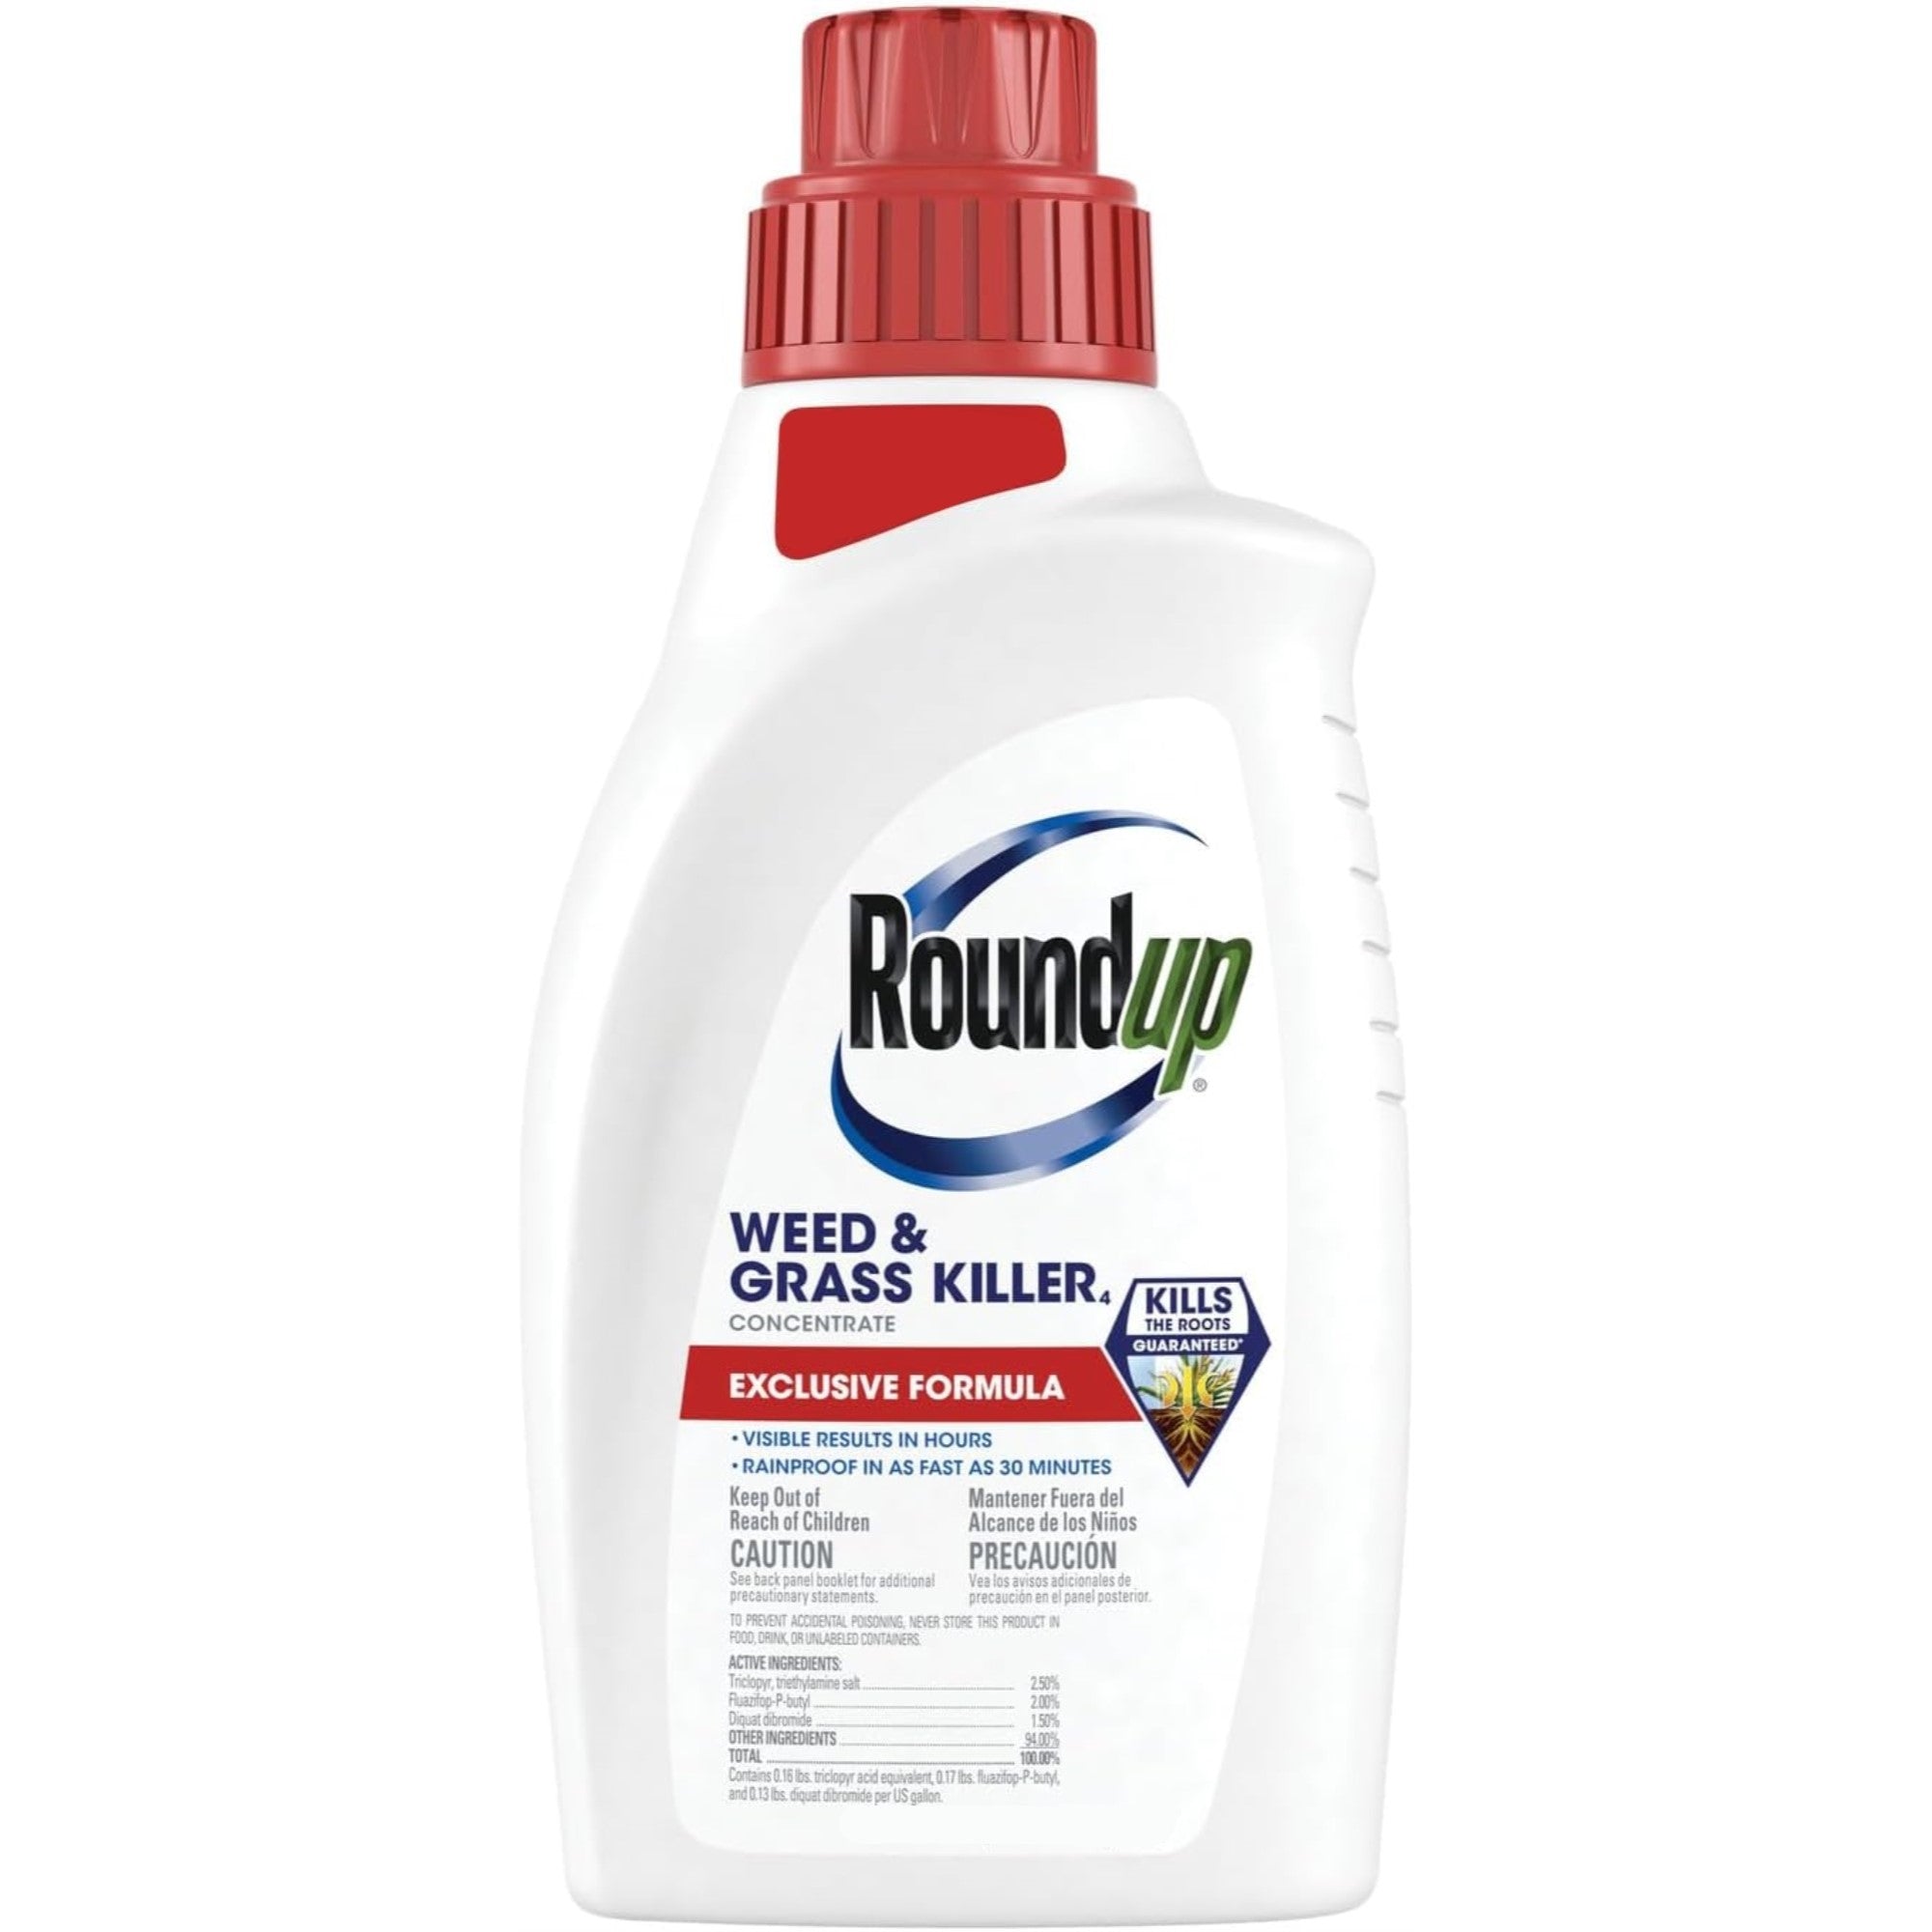 Roundup Weed & Grass Killer Concentrate, Best Around Flower Beds, Walkways or Fences